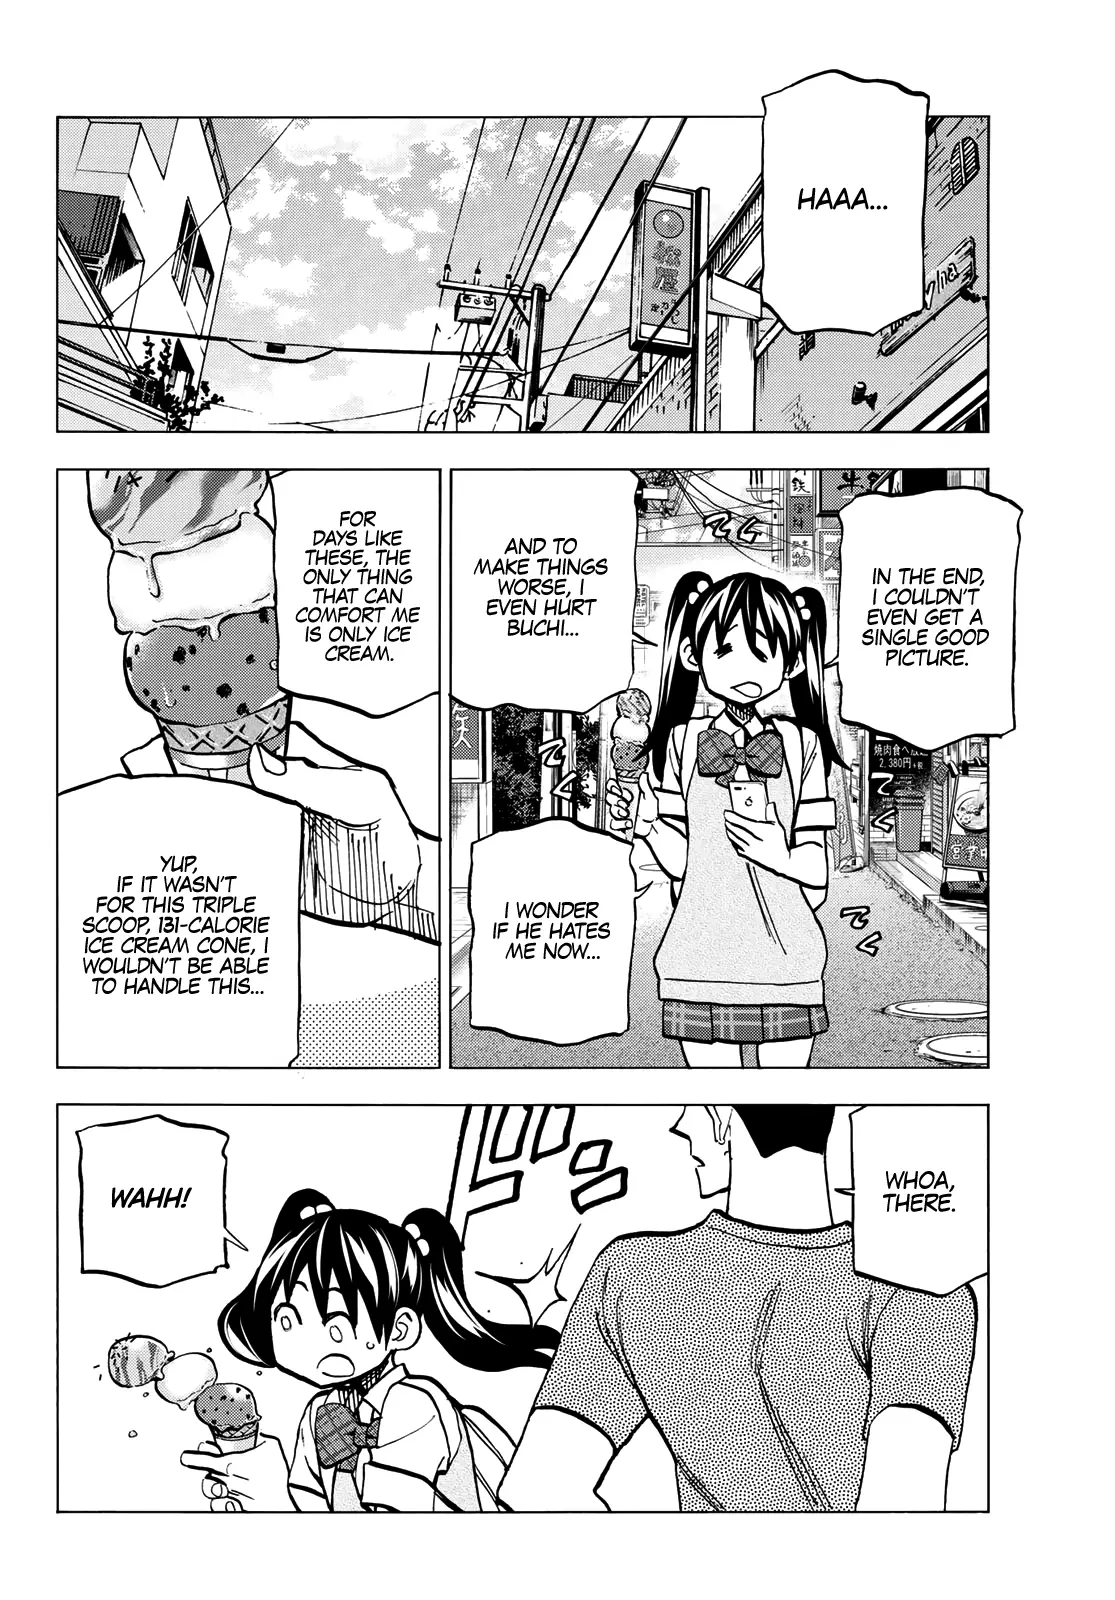 The Story Between A Dumb Prefect And A High School Girl With An Inappropriate Skirt Length - 10 page 13